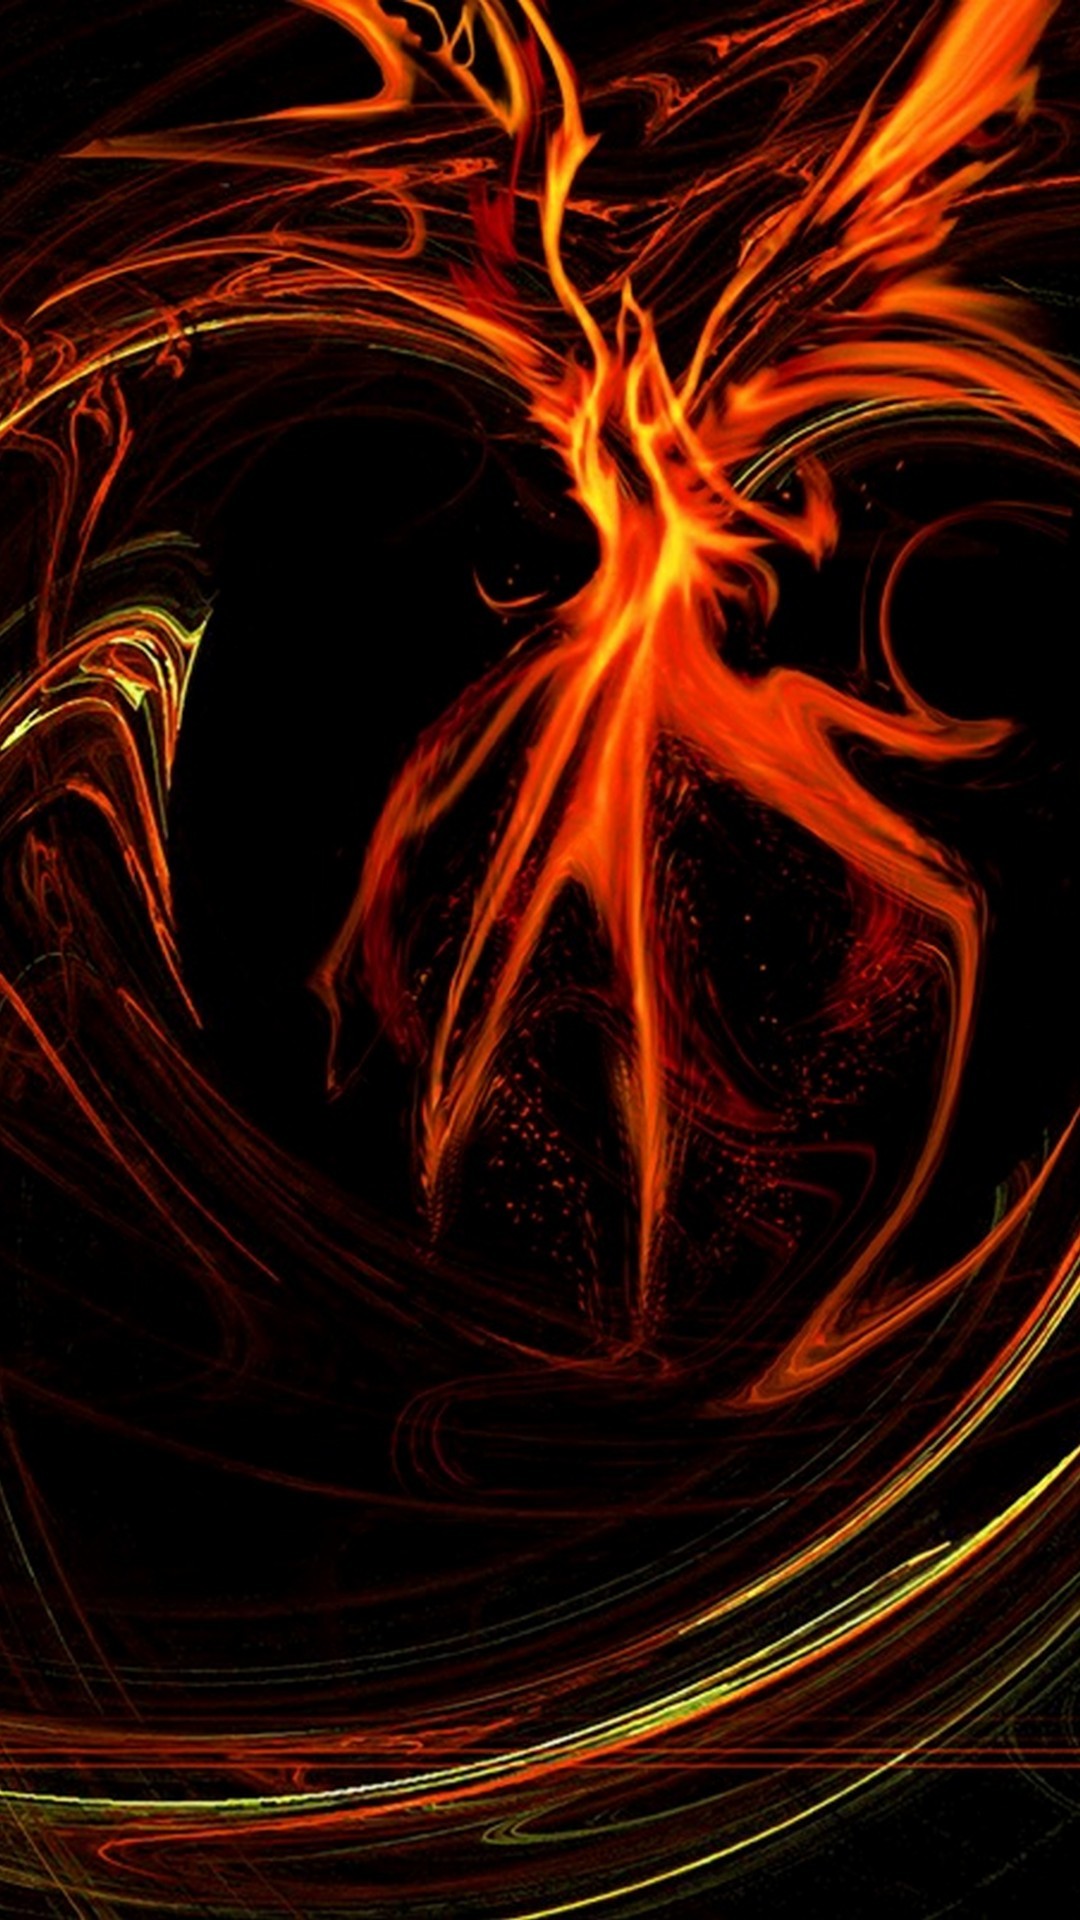 iPhone Wallpaper Dark Phoenix with image resolution 1080x1920 pixel. You can make this wallpaper for your iPhone 5, 6, 7, 8, X backgrounds, Mobile Screensaver, or iPad Lock Screen